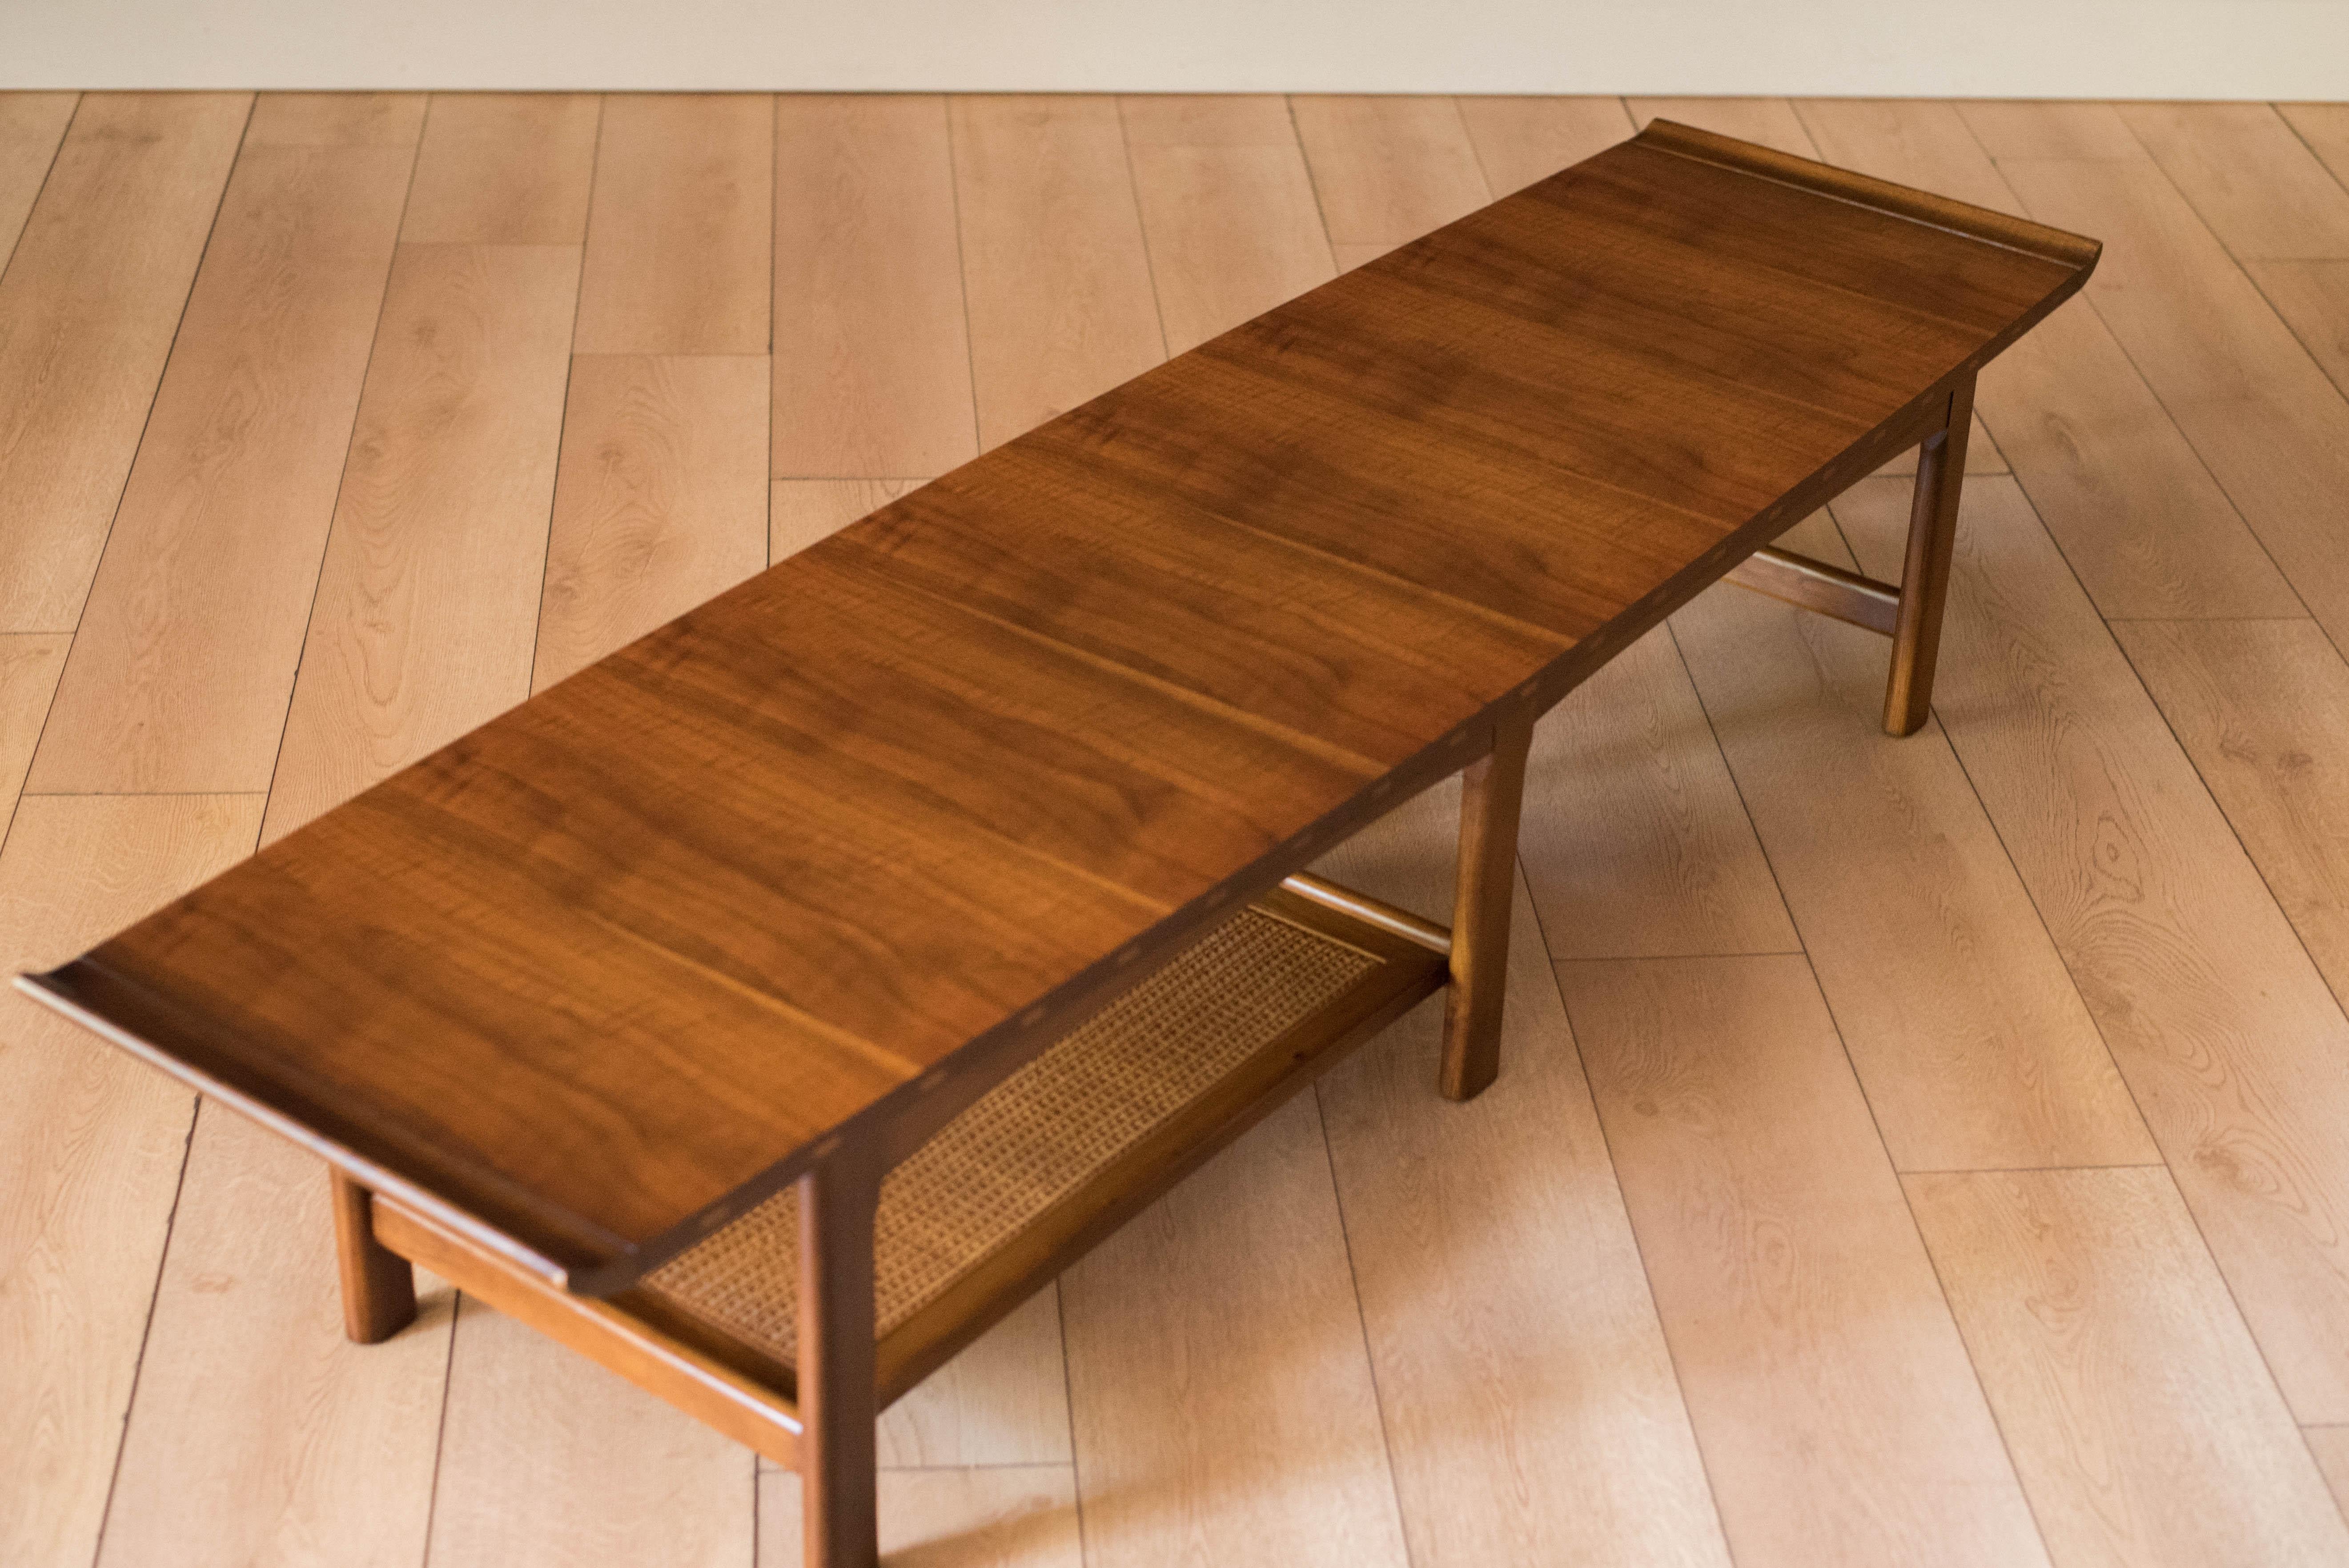 Cane Vintage Walnut and Oak Surfboard Coffee Table Bench by Lane Furniture Co.